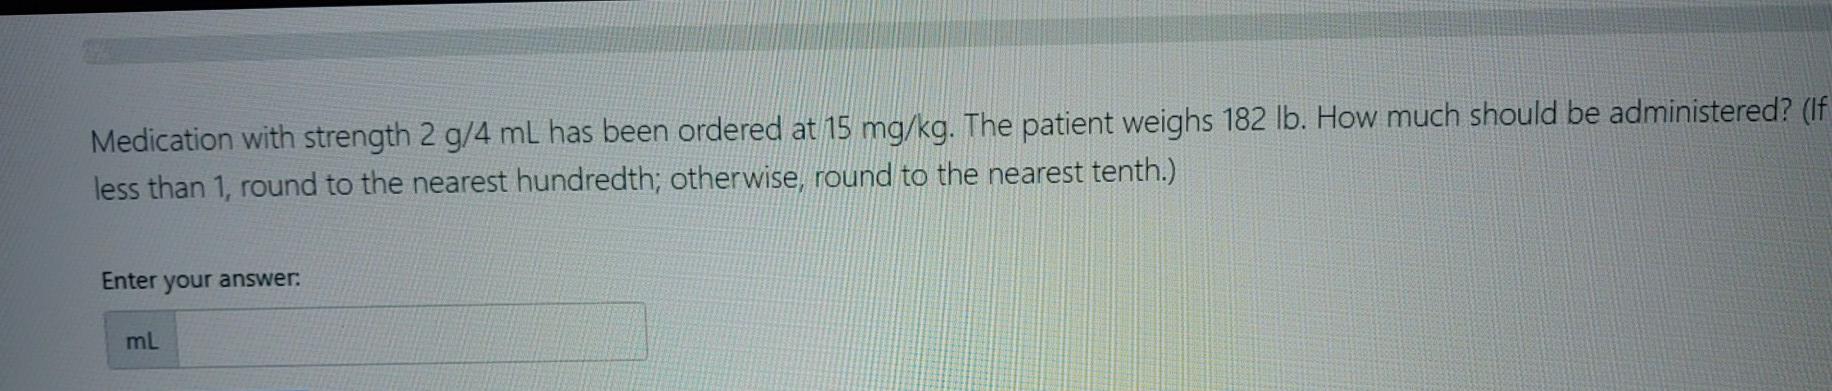 Medication With Strength 2 G 4 Ml Has Been Ordered At 15 Mg Kg The Patient Weighs 182 Lb How Much Should Be Administer 1